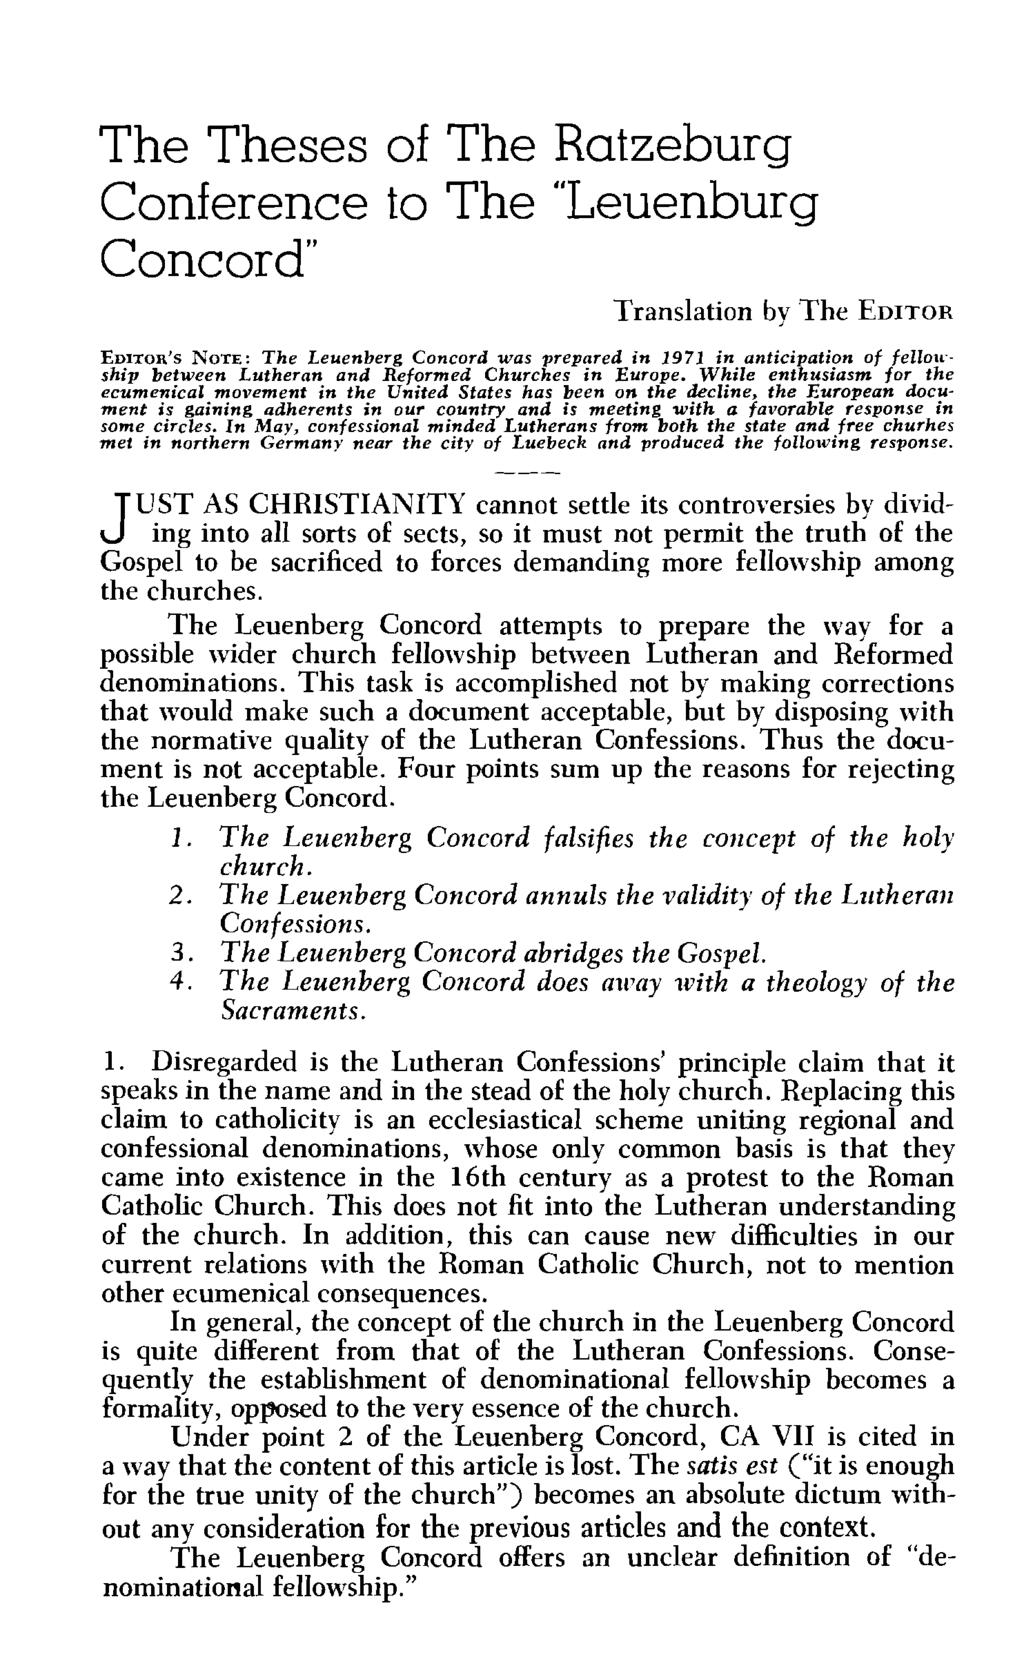 The Theses of The Ratzeburg Conference to The "Leuenburg Concord" Translation by The EDITOR EDITOR'S NOTE: The Leuenberg Concord was prepared in 1971 in anticipation of felloarship between Lutheran